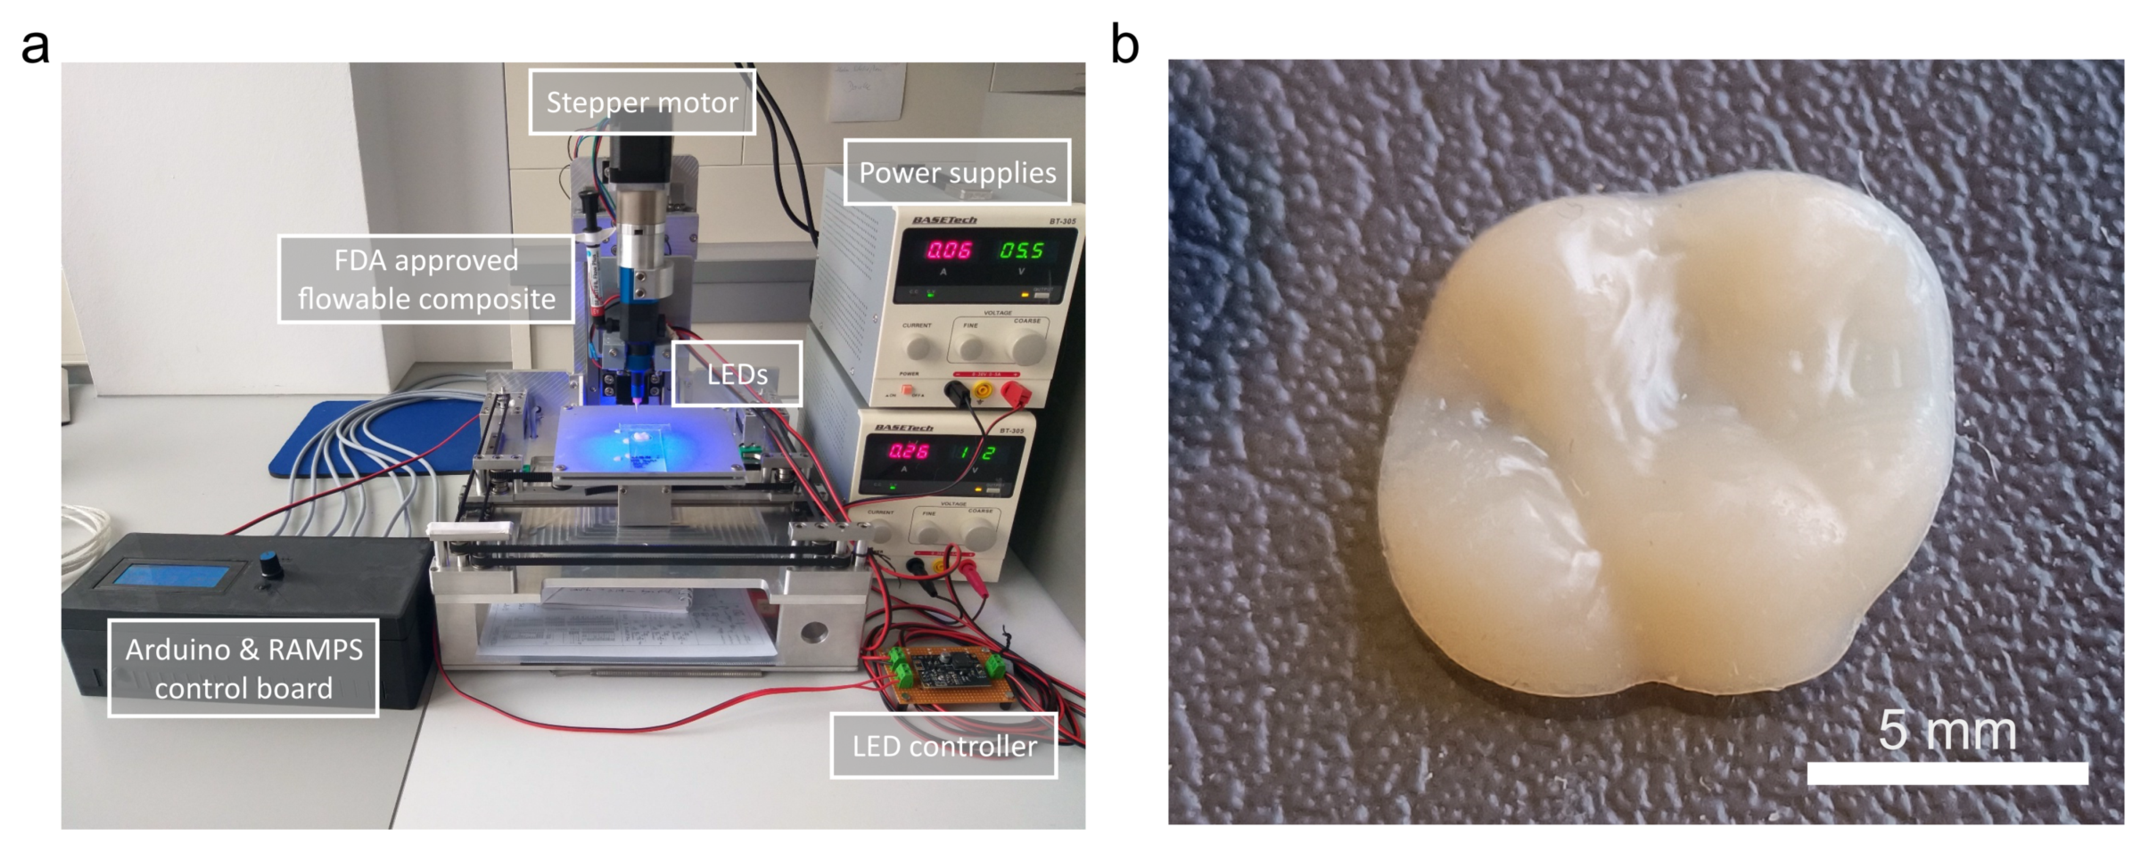 Novel 3D printer (a) and artificial occlusal surface made of composite material (b)